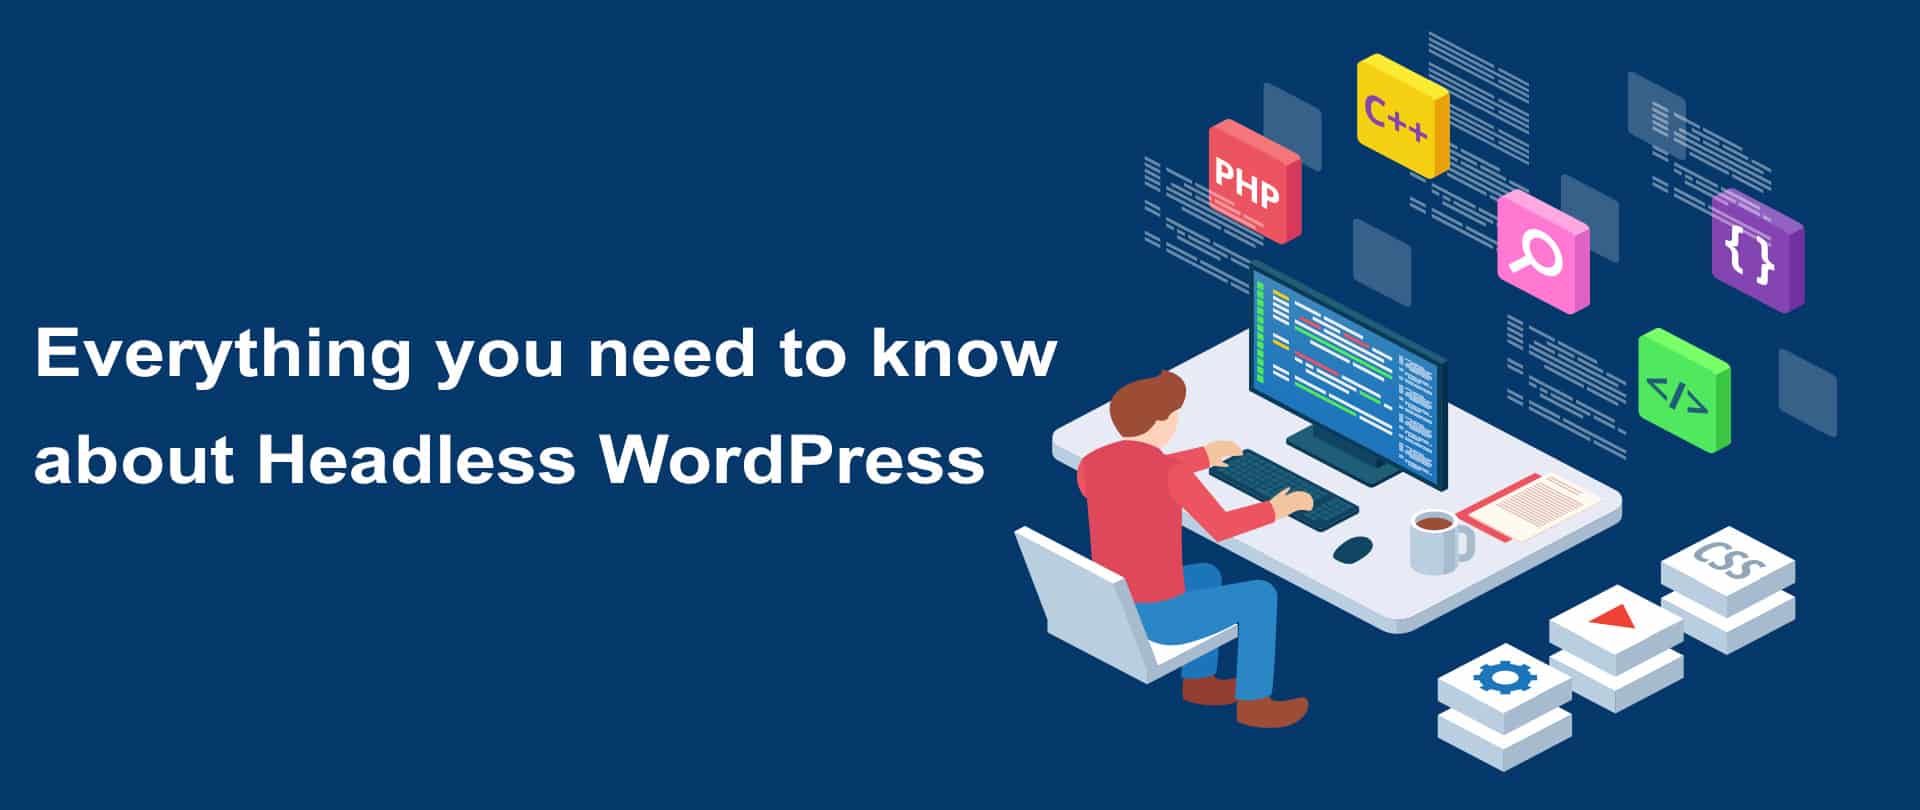 Everything you need to know about Headless WordPress